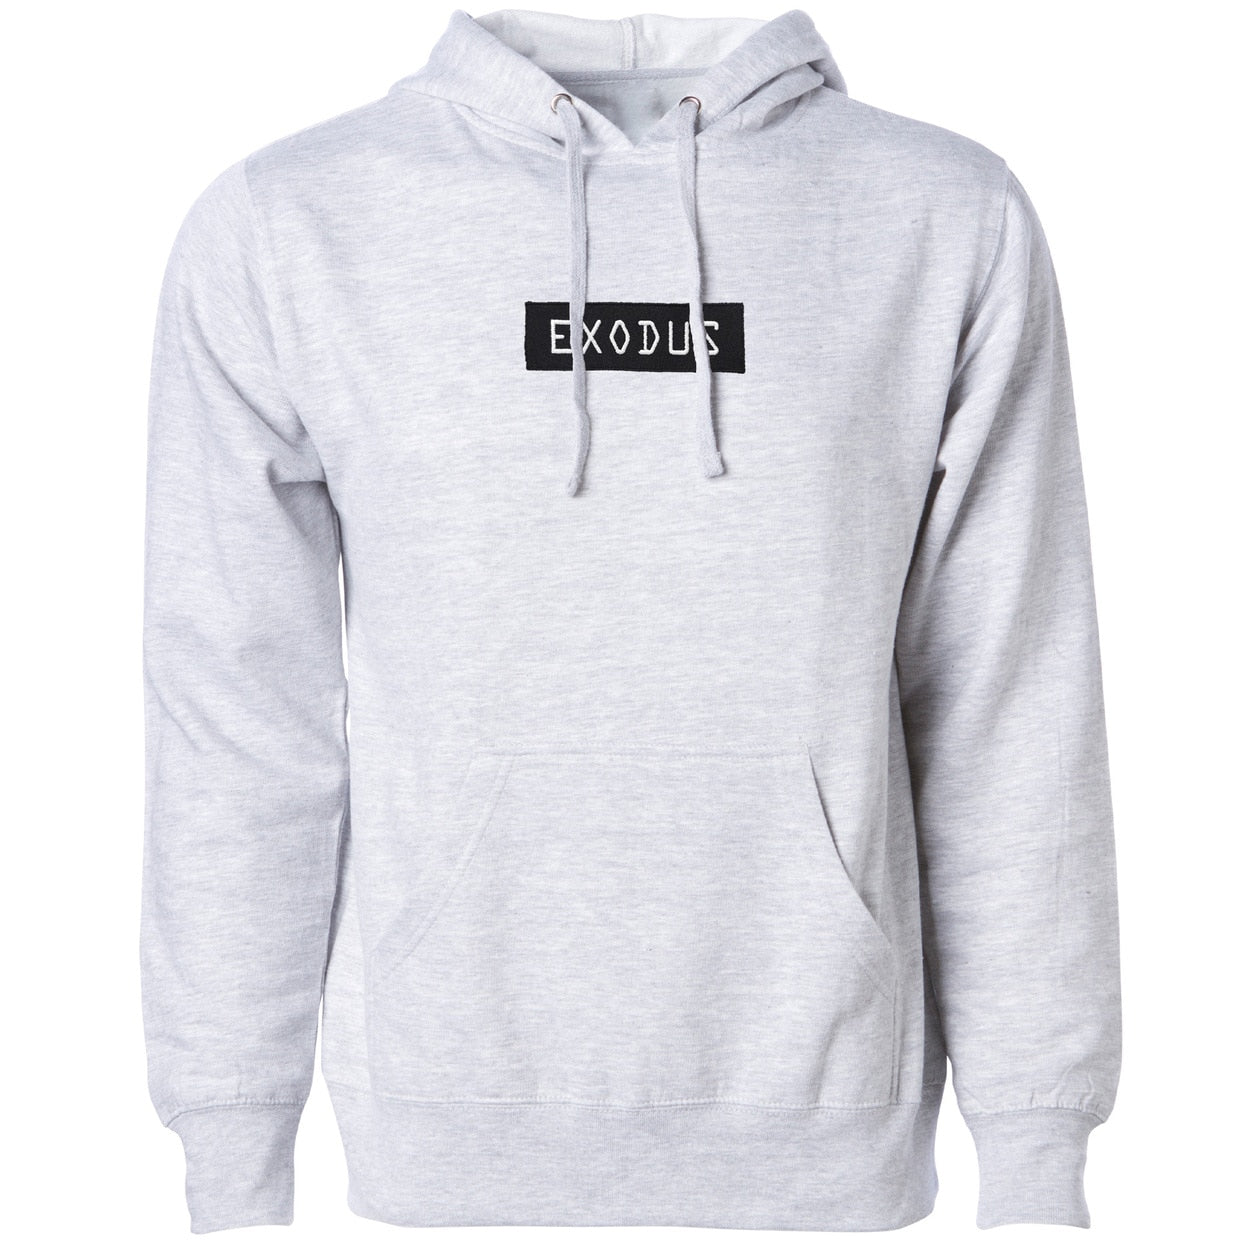 Exodus Optical Embroidered Pullover Hoodie - Heather Grey